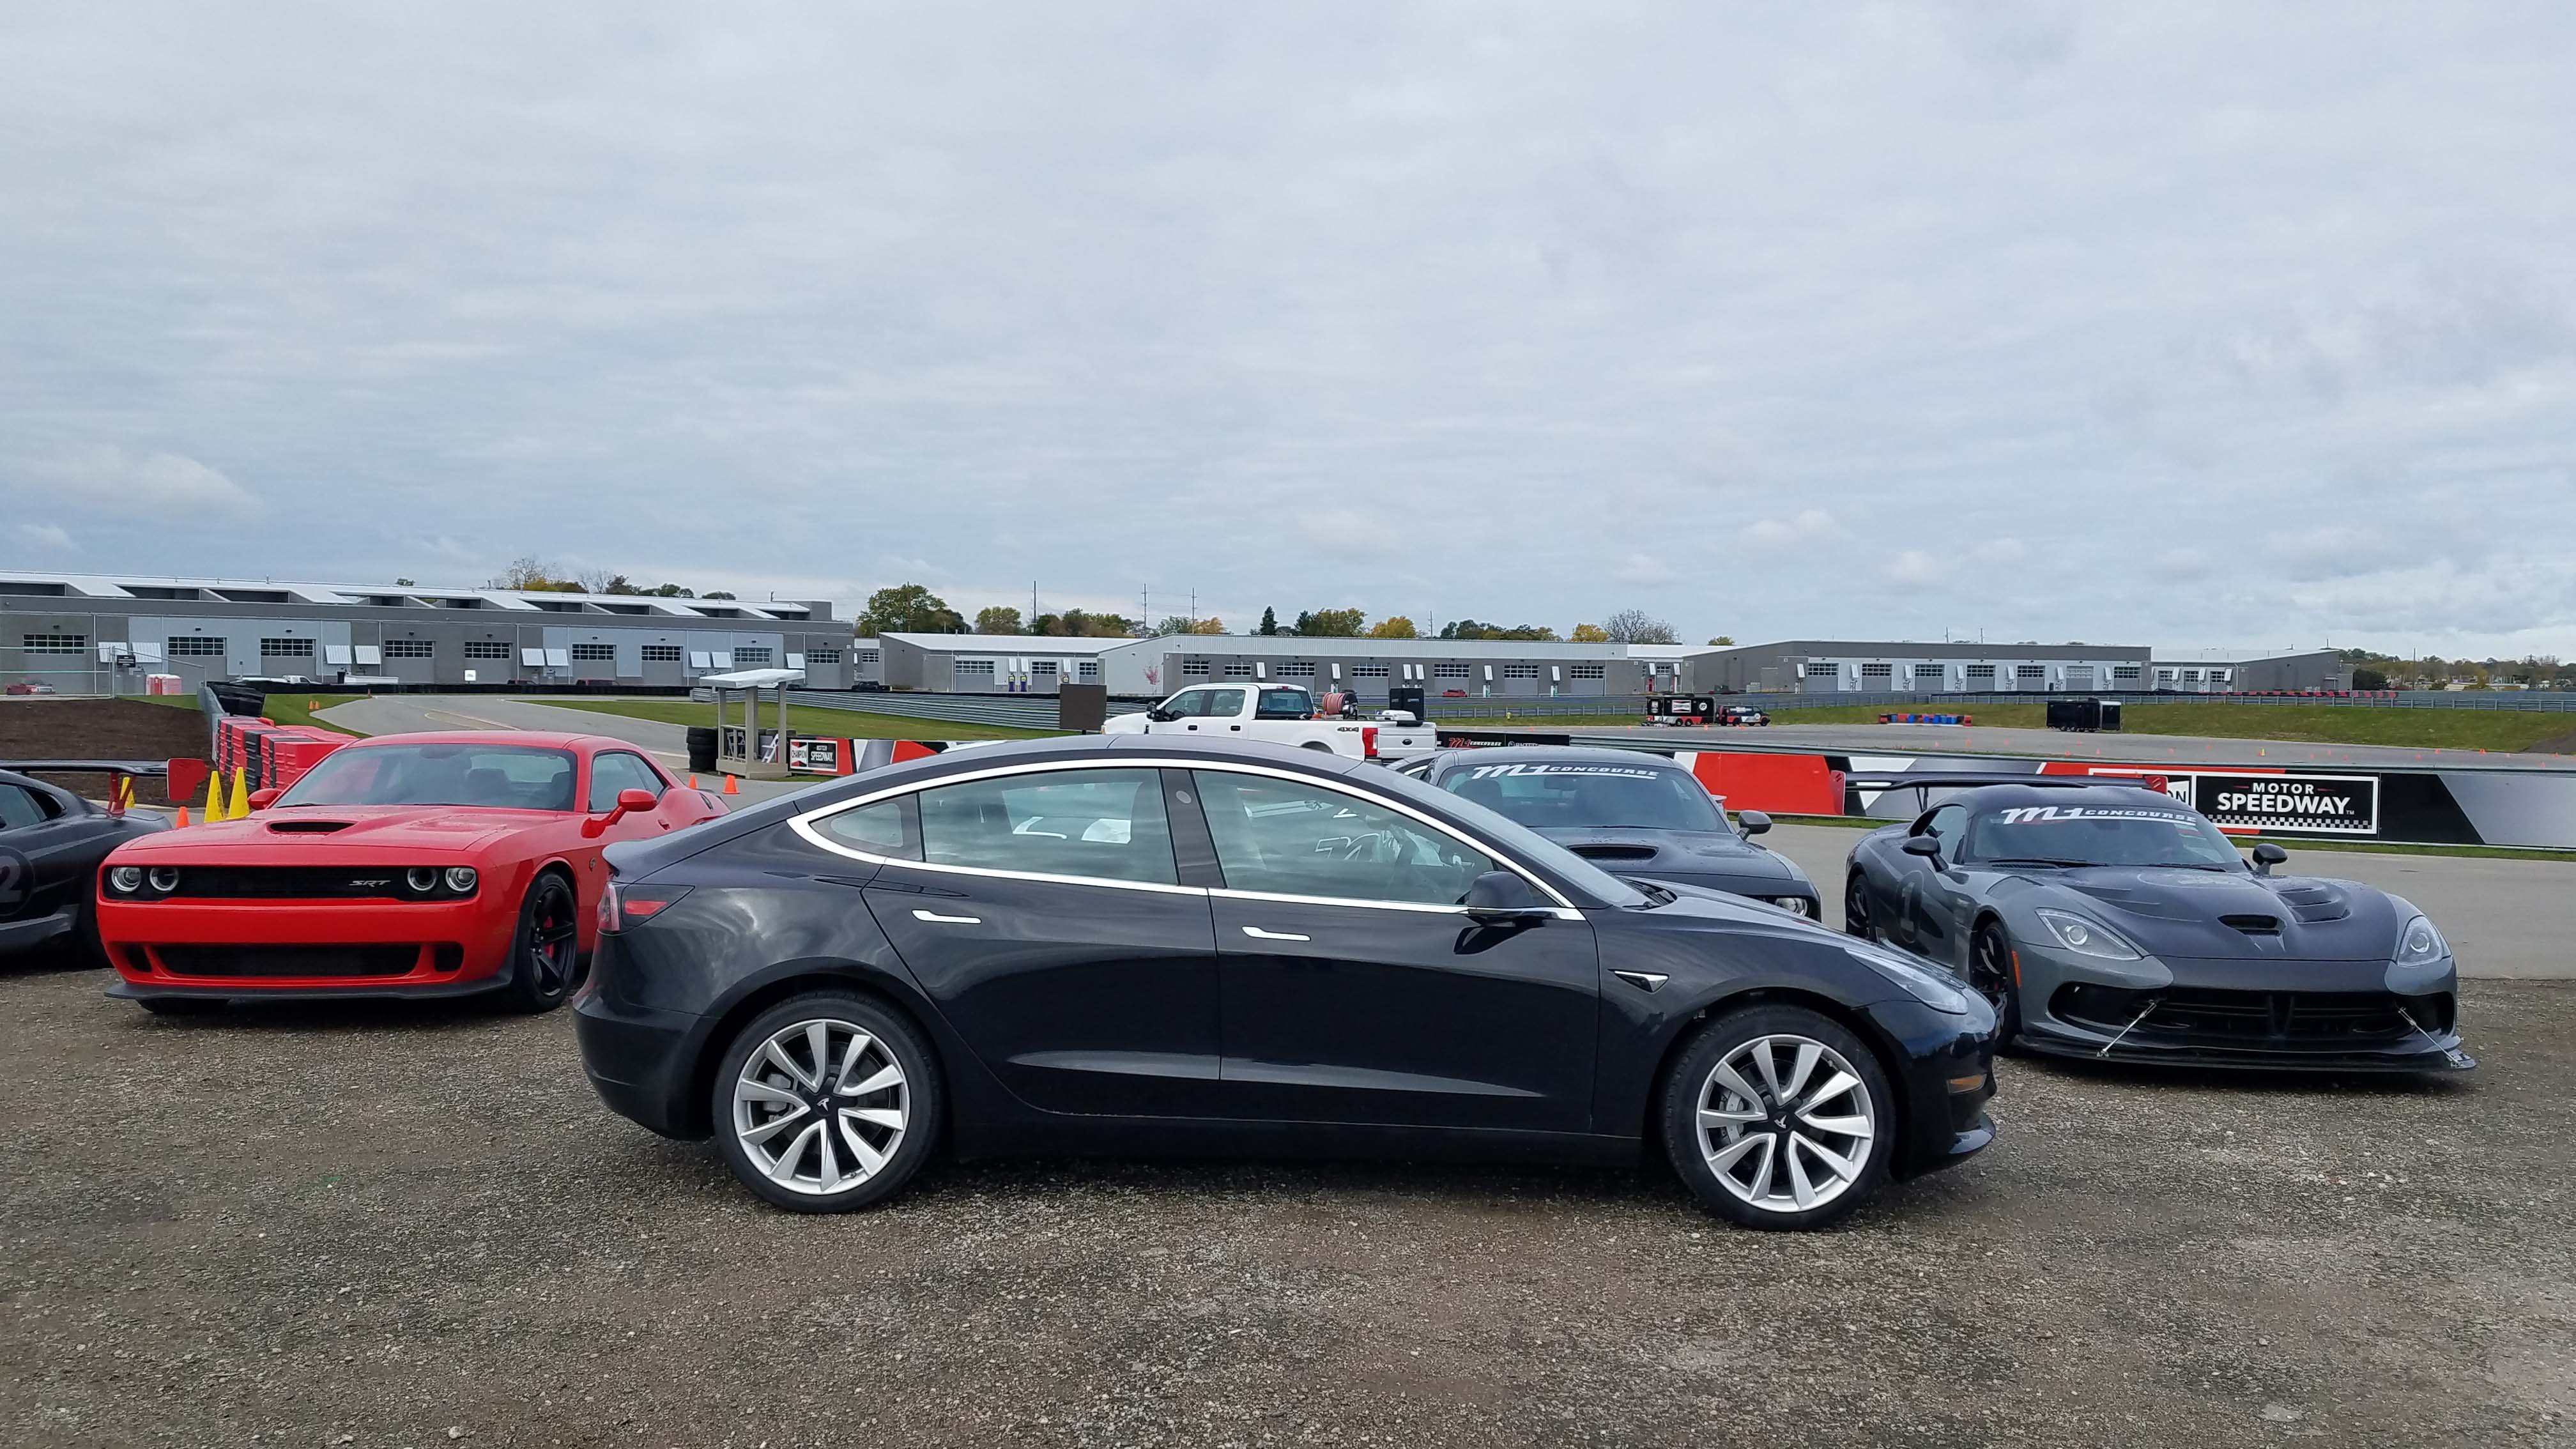 On track at M1 Concourse, the Tesla Model 3 makes no sound. Only the chirp of tires and exterior wind noise invade the cockpit at full flog.